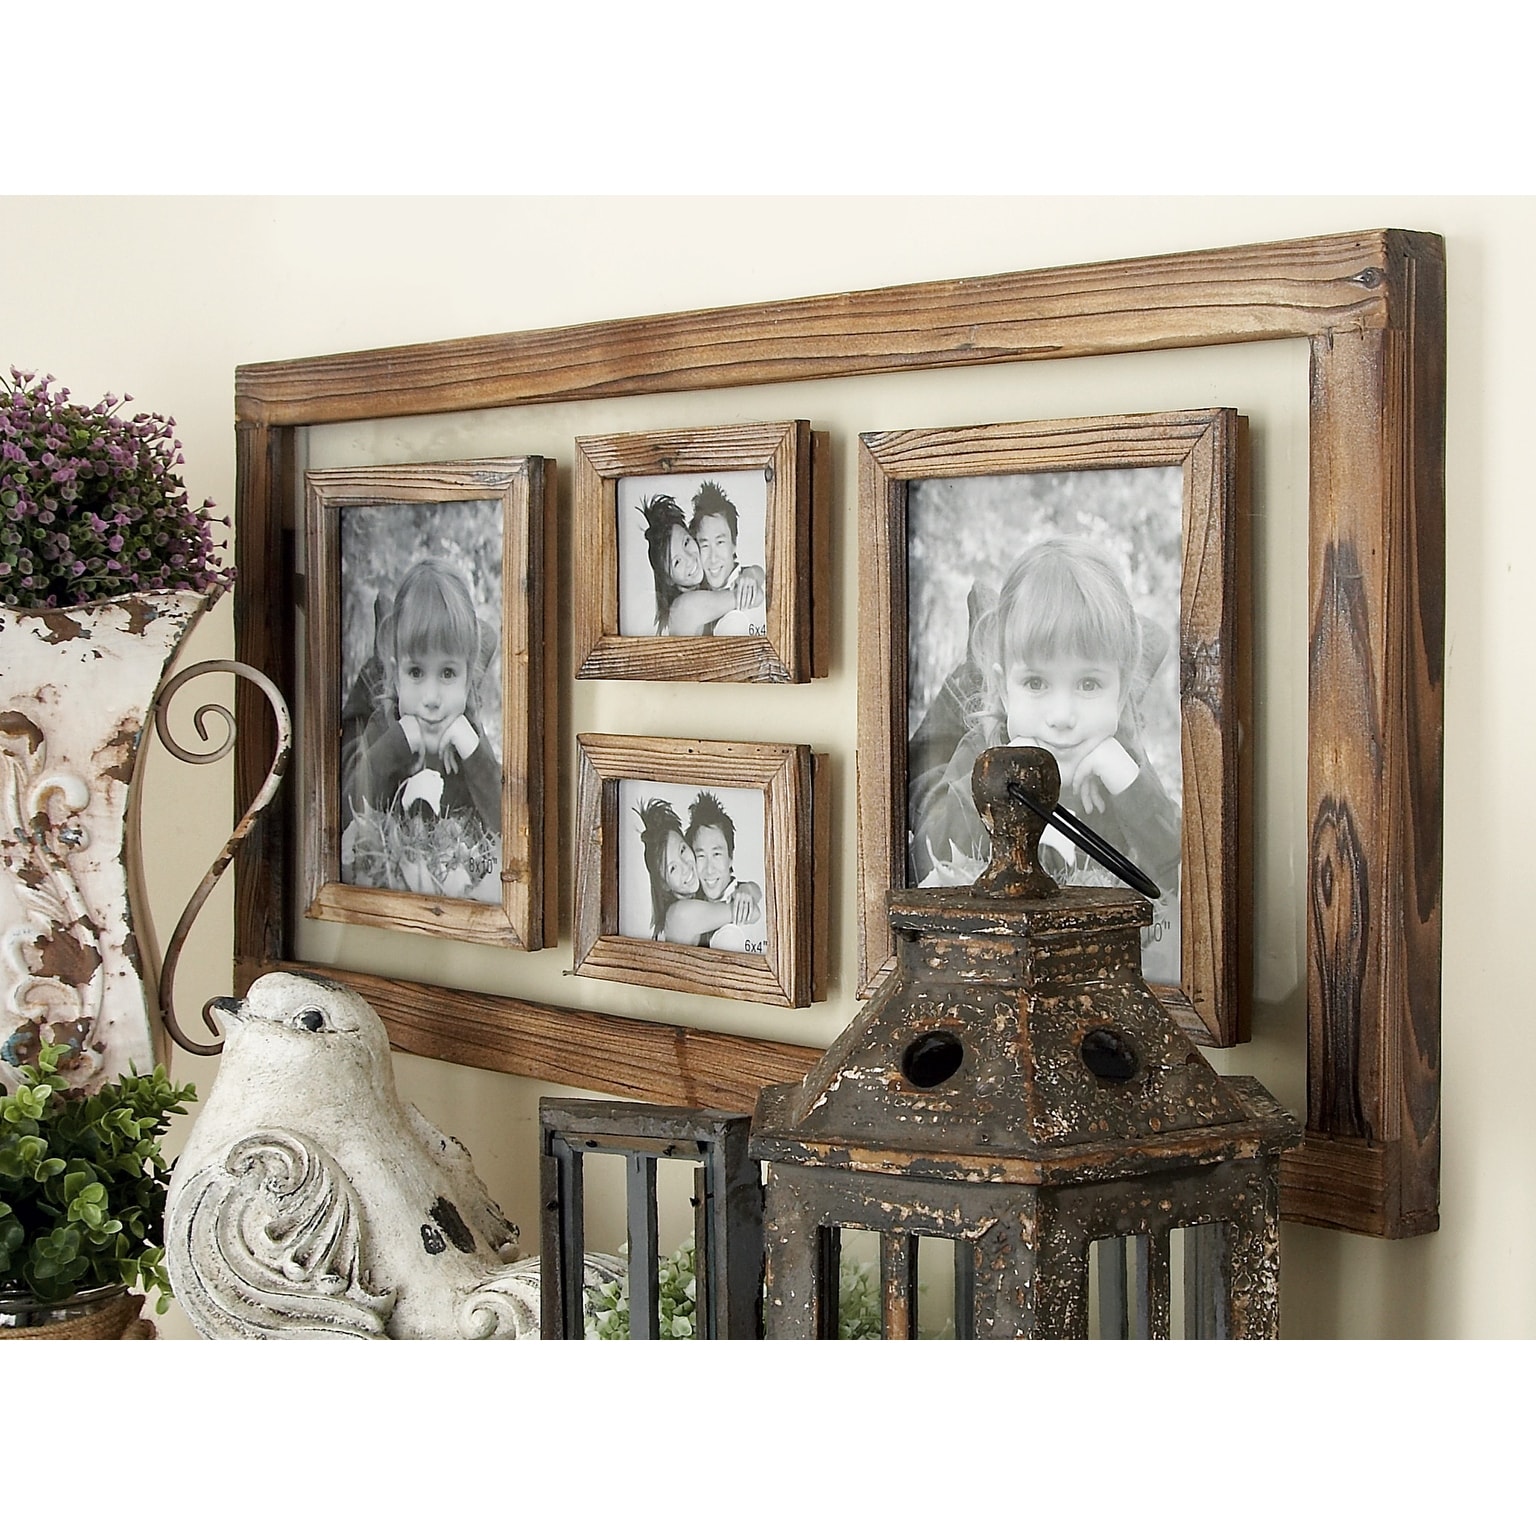 https://ak1.ostkcdn.com/images/products/is/images/direct/6855103c5d106de41f34c85c3b733c7c58b16b5e/Brown-Fir-Vintage-Wall-Photo-Frame-Family-17-x-37-x-2.jpg